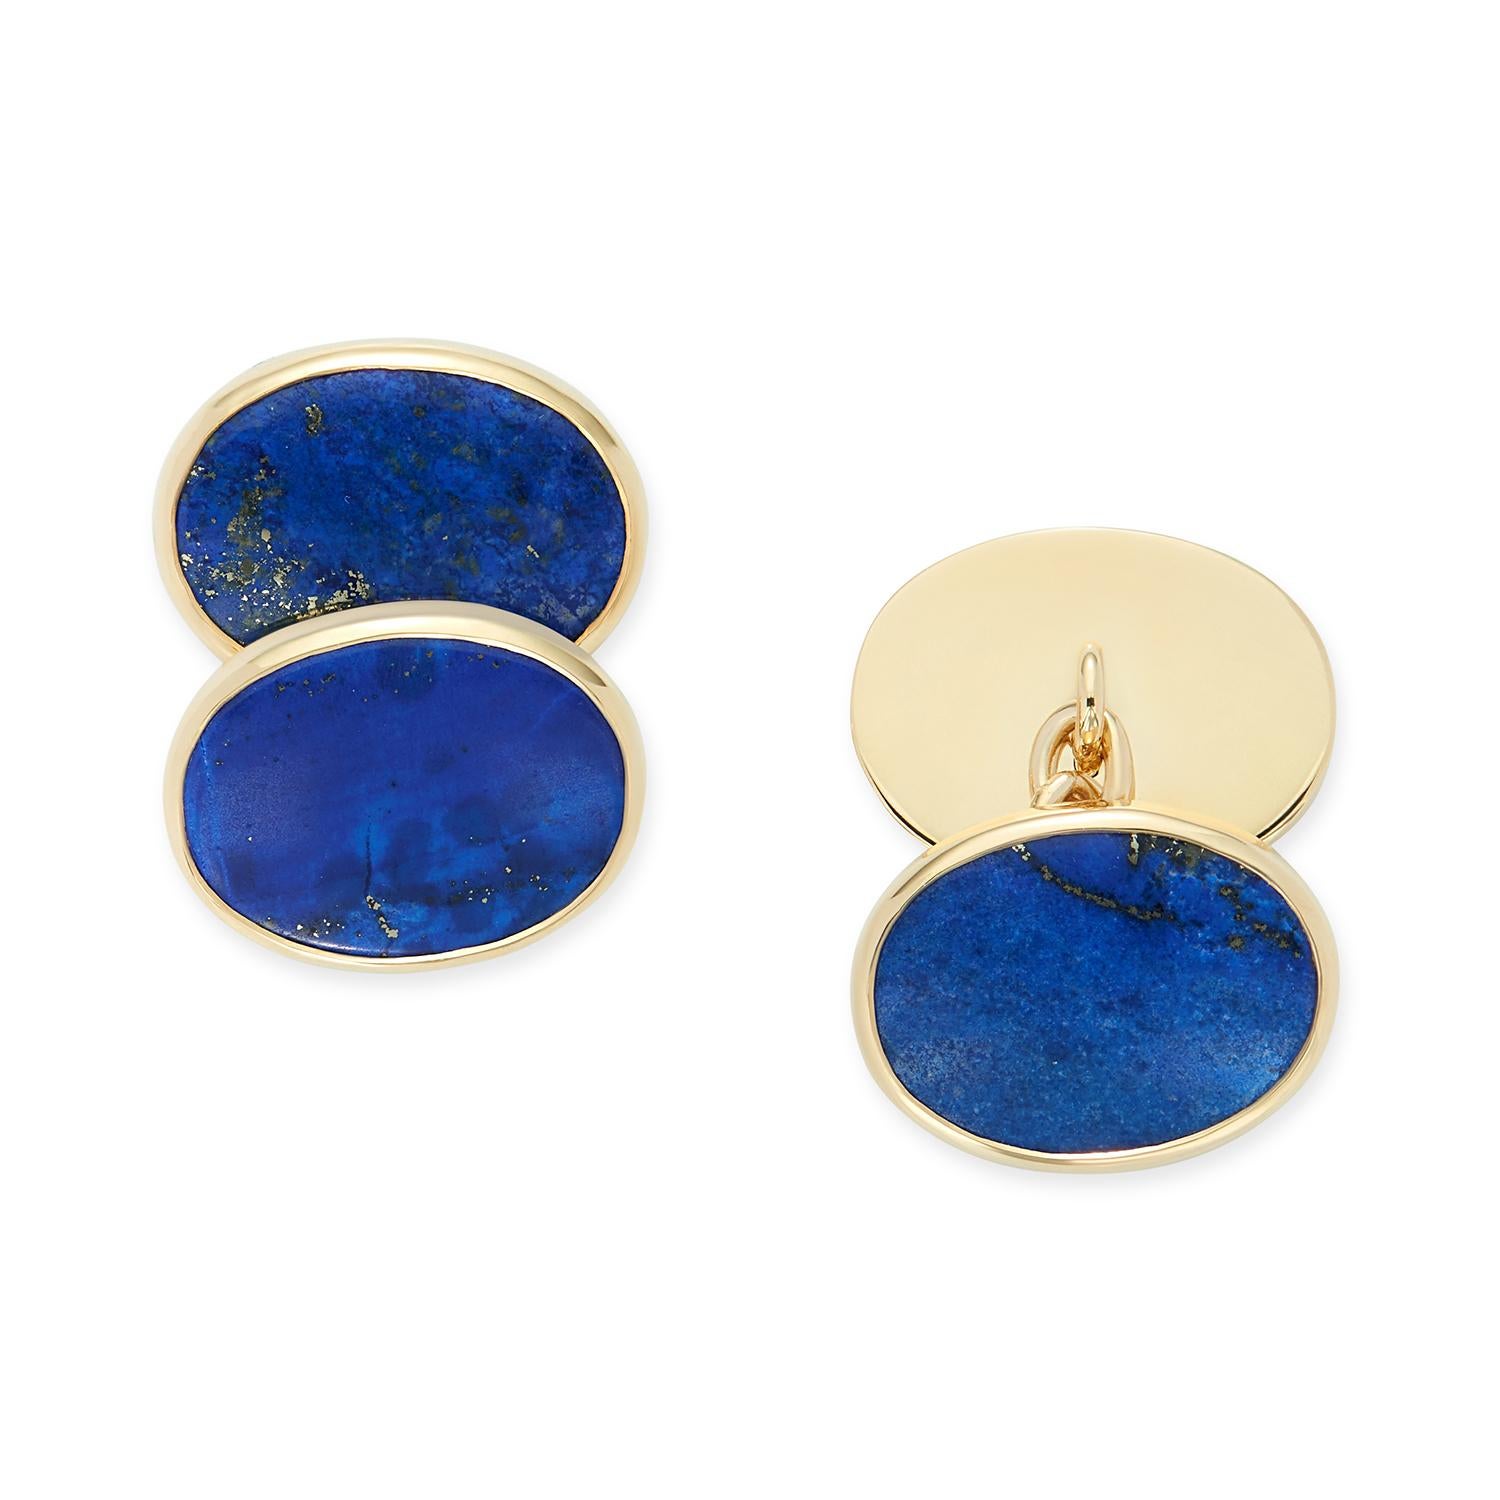 A pair of striking Lapis Lazuli cufflinks set in 18 karat yellow gold with full gold back and chain links. The vibrant blue of this beautiful Lapis is eye-catching and set off beautifully by the yellow gold. 
Natural Lapis with natural inclusions